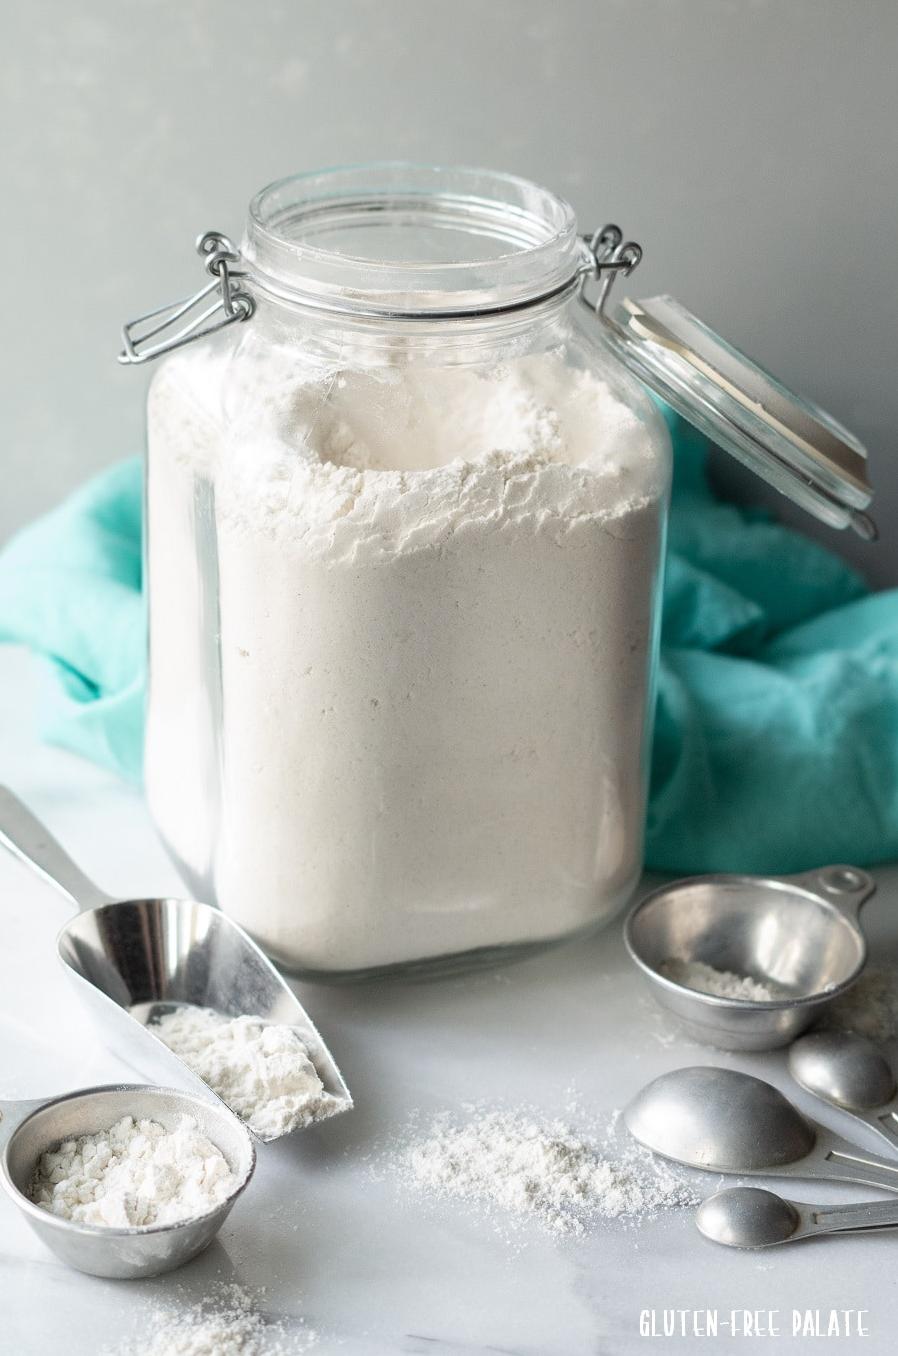  A gluten-free flour blend that's easy to make at home